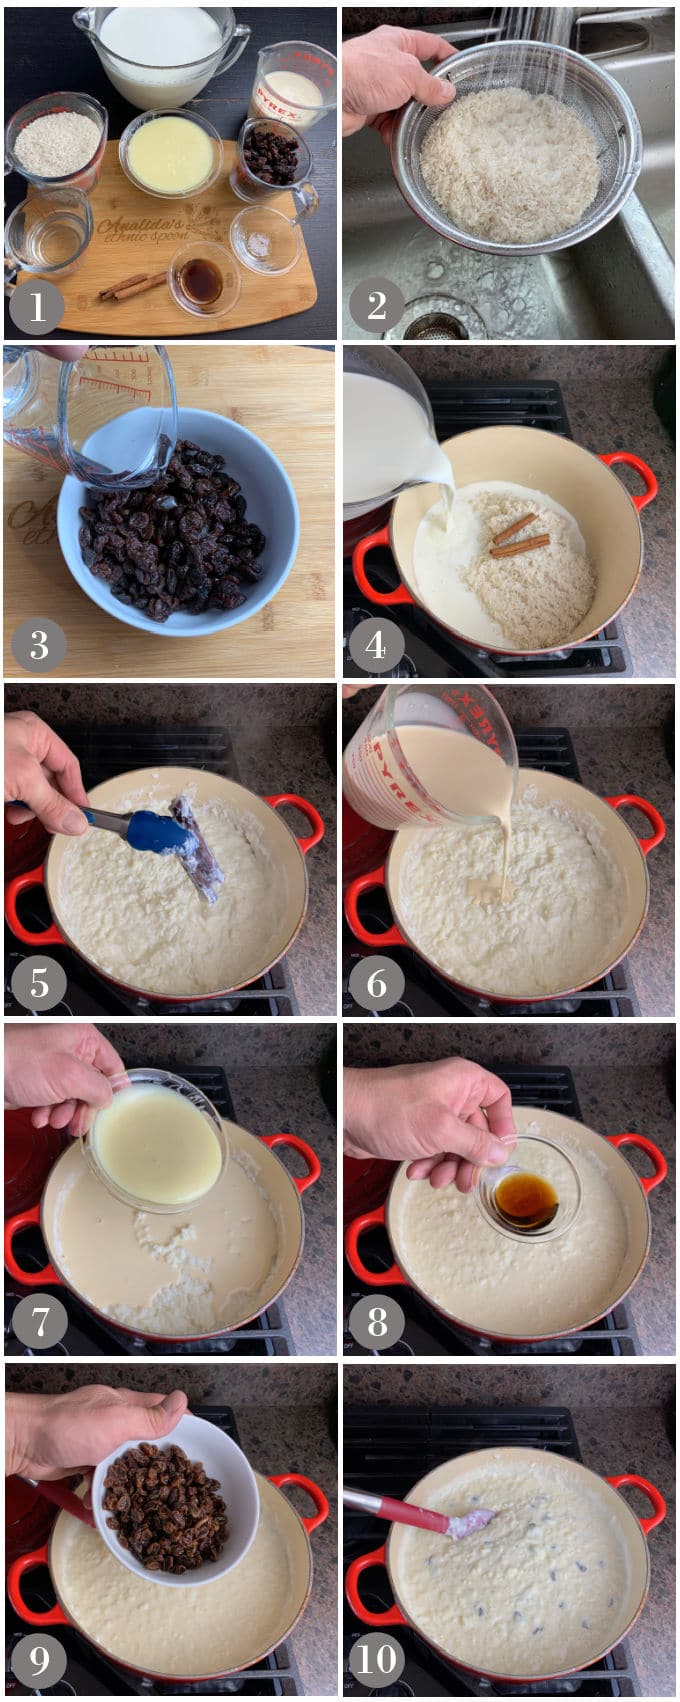 A collage of photos showing the steps to make arroz con leche or Latin style rice pudding on a stove in a red Dutch oven.